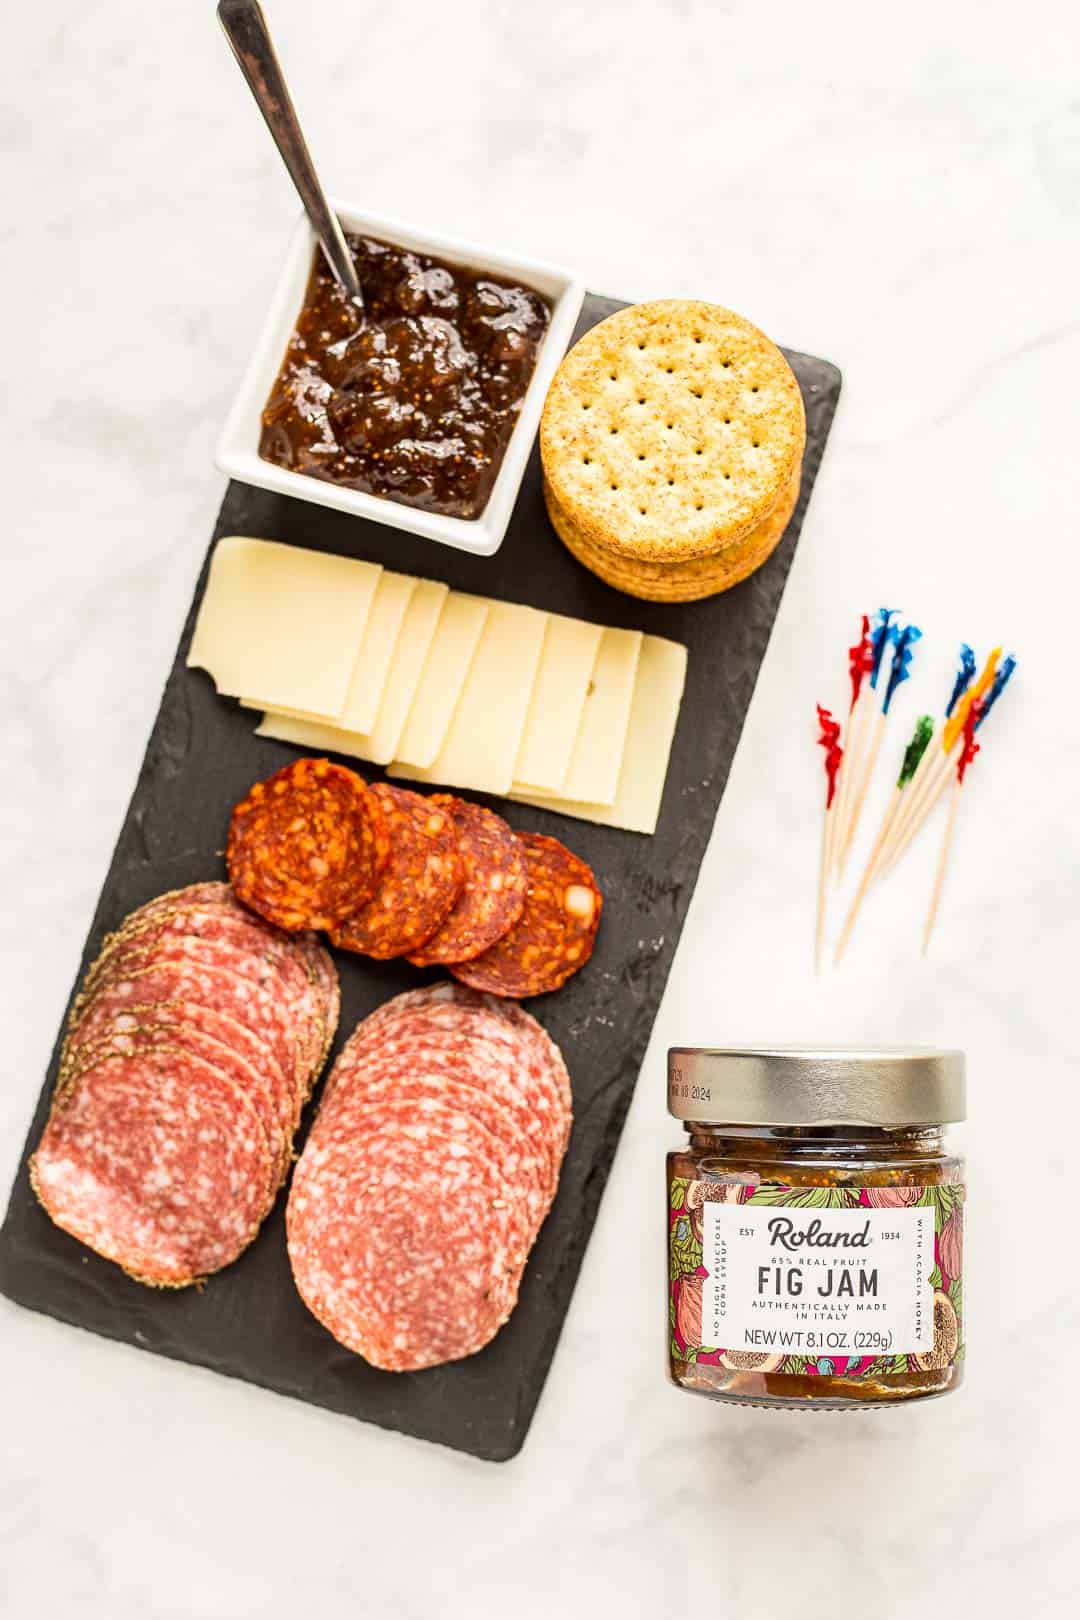 Jar of Roland Foods Fig Jam next to a charcuterie board